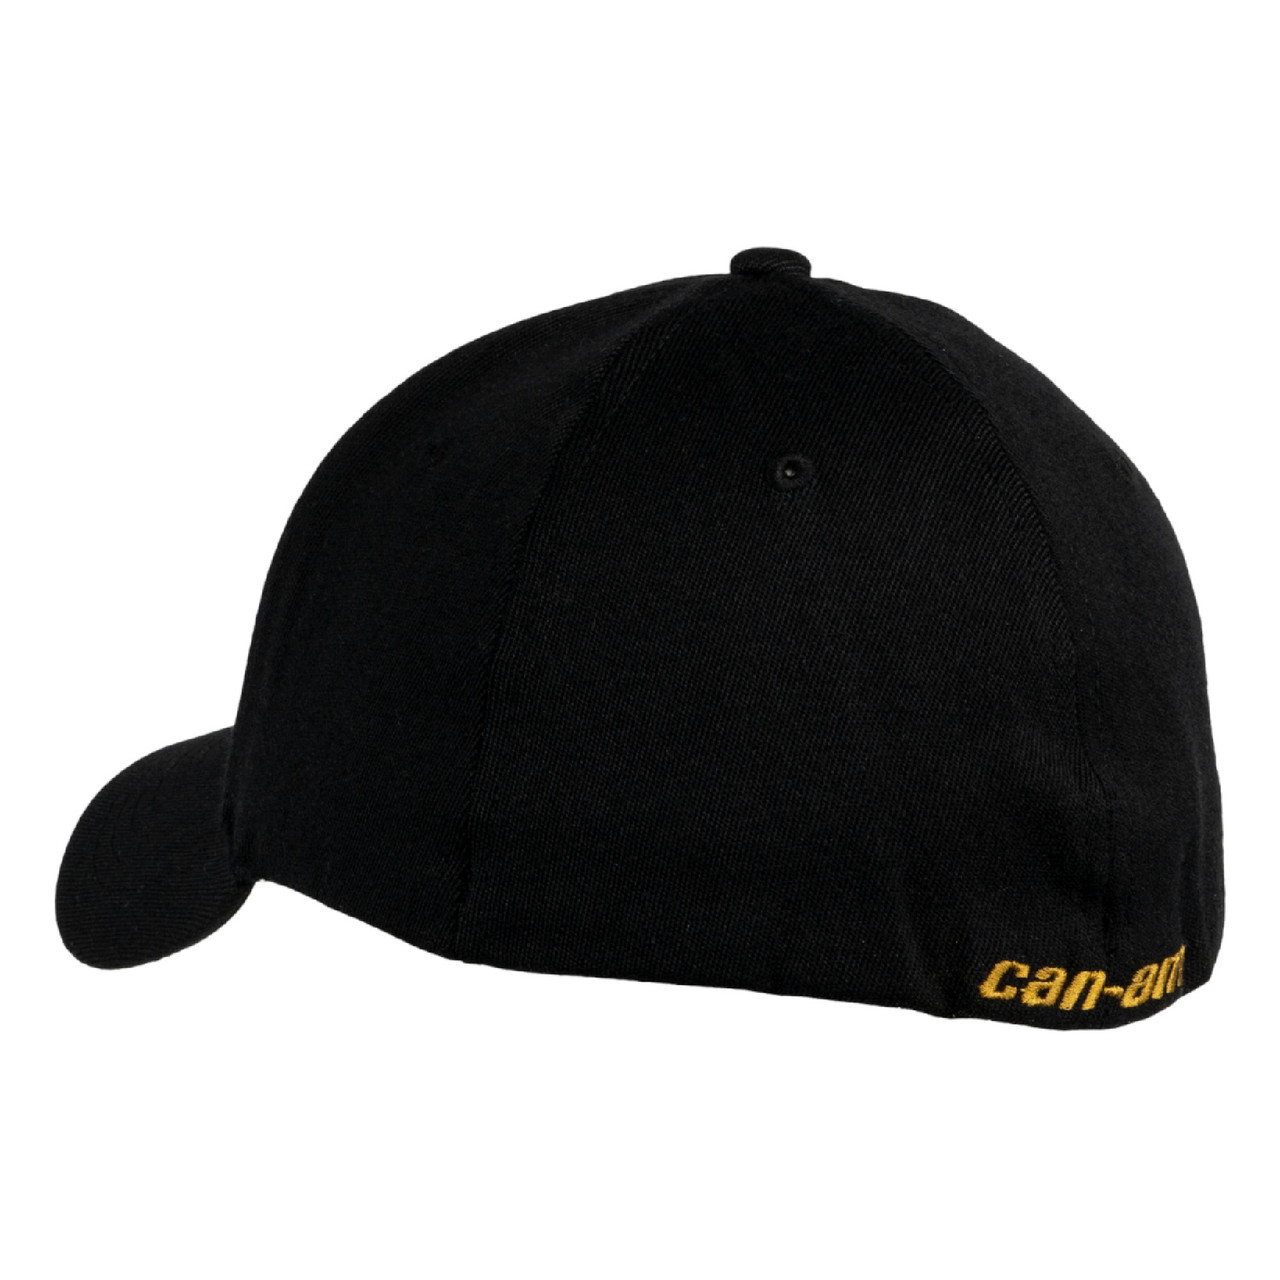 Can-Am New OEM, Men's Large/XL Branded Fitted ESTD Cap, 4547737390